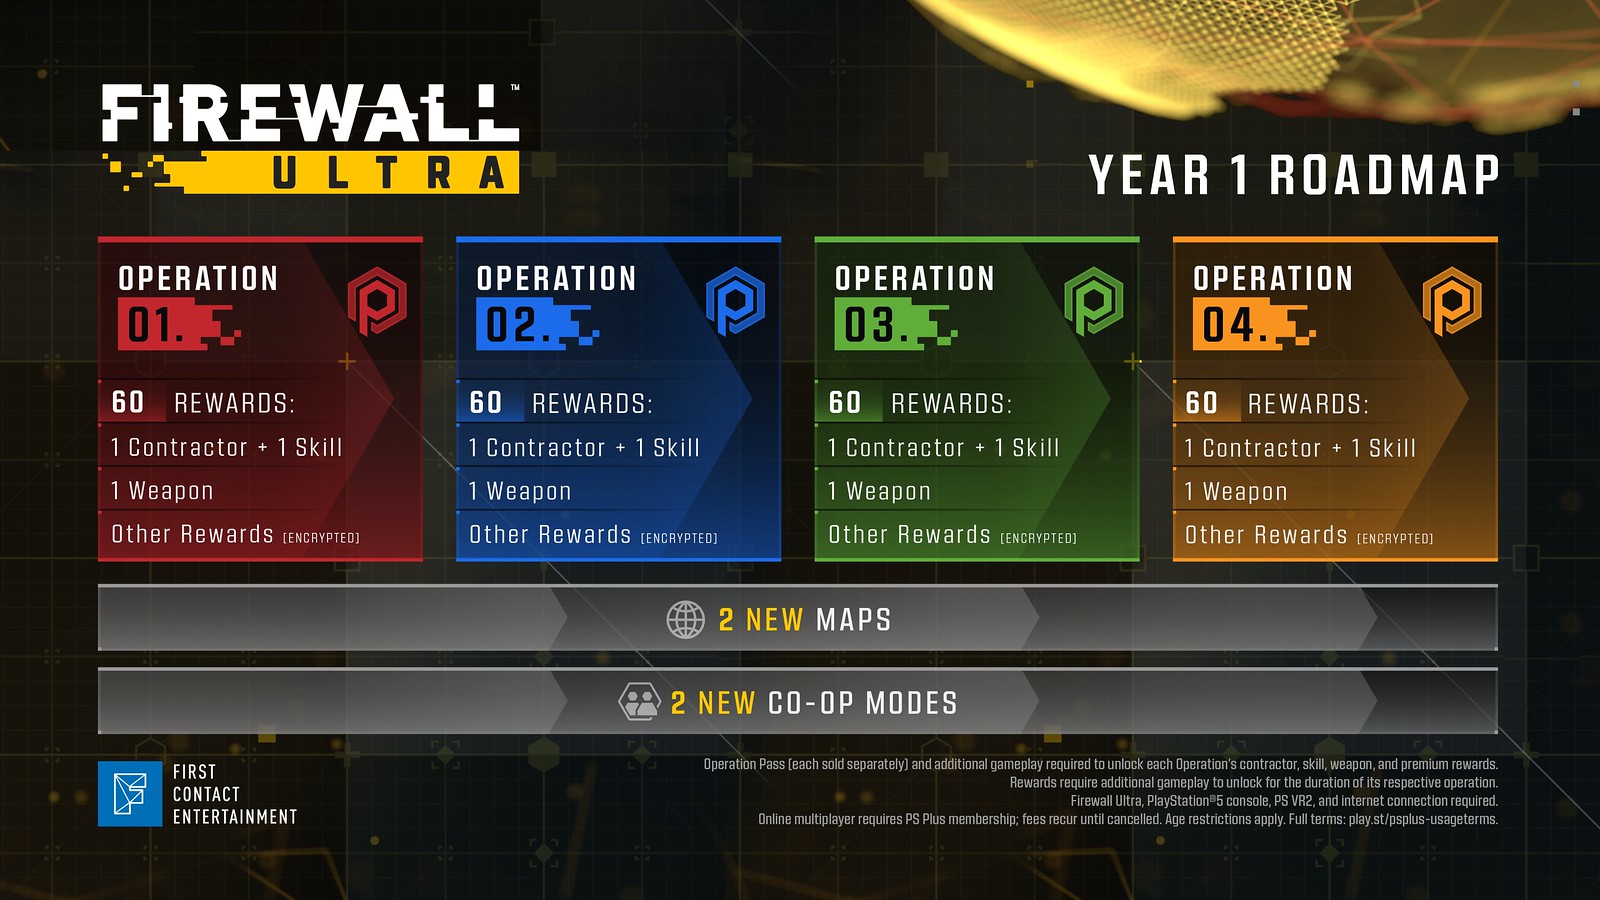 The Year 1 Roadmap encapsulates plans for the first full year of content and updates for Firewall Ultra. Operations 1 through 4 will include 60 Rewards. Rewards include 1 Contractor + 1 Skill, 1 Weapon, Other Rewards [Encrypted]. Separate from the Operations, there will be 2 new maps and 2 new co-op modes. Operation Pass (each sold separately) and additional gameplay required to unlock each Operation’s contractor, skill, weapon, and premium rewards. Rewards require additional gameplay to unlock for the duration of its respective operation.